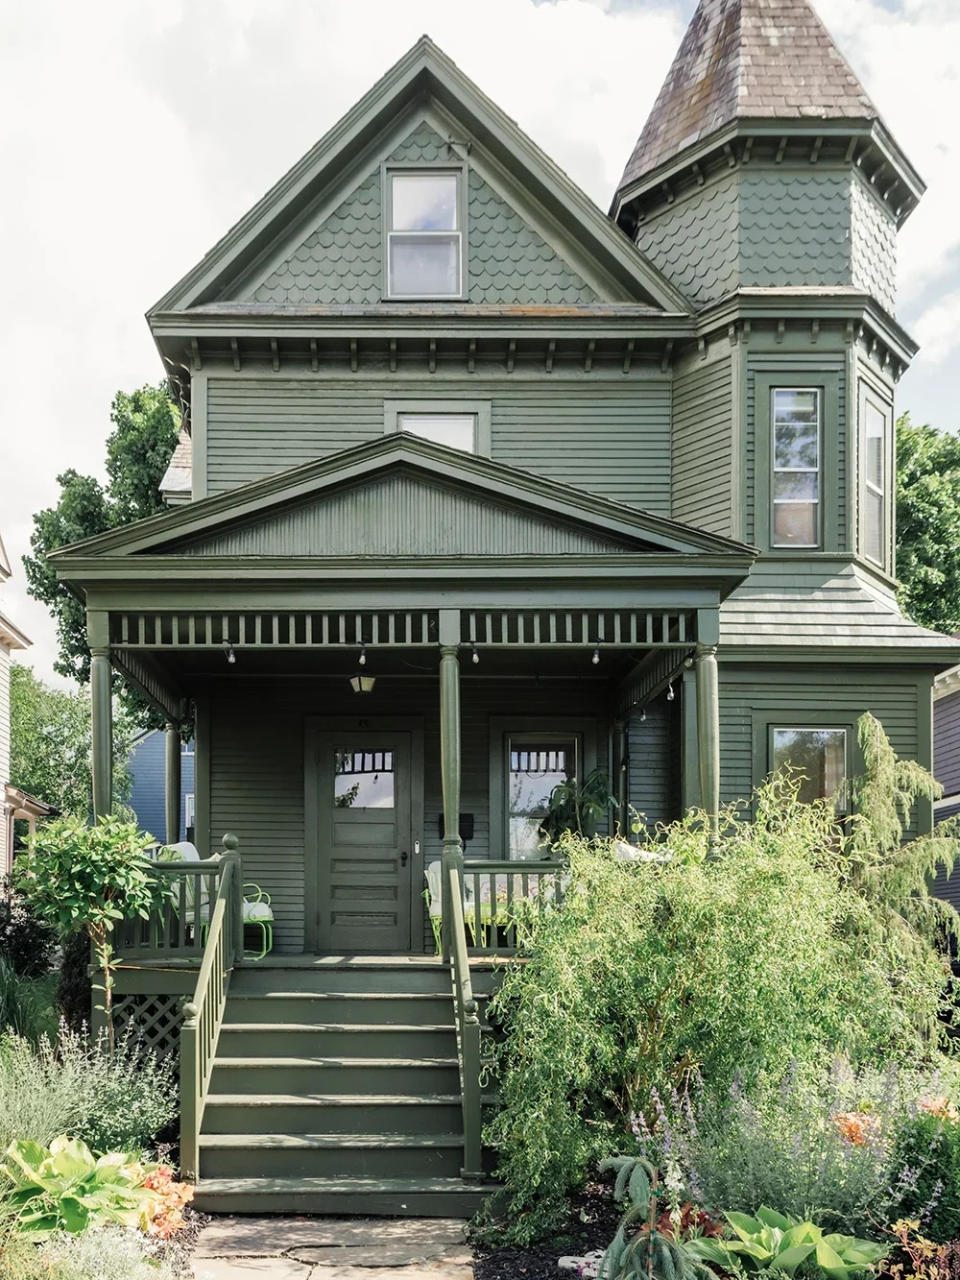 Victorian home exterior painted all forest green.